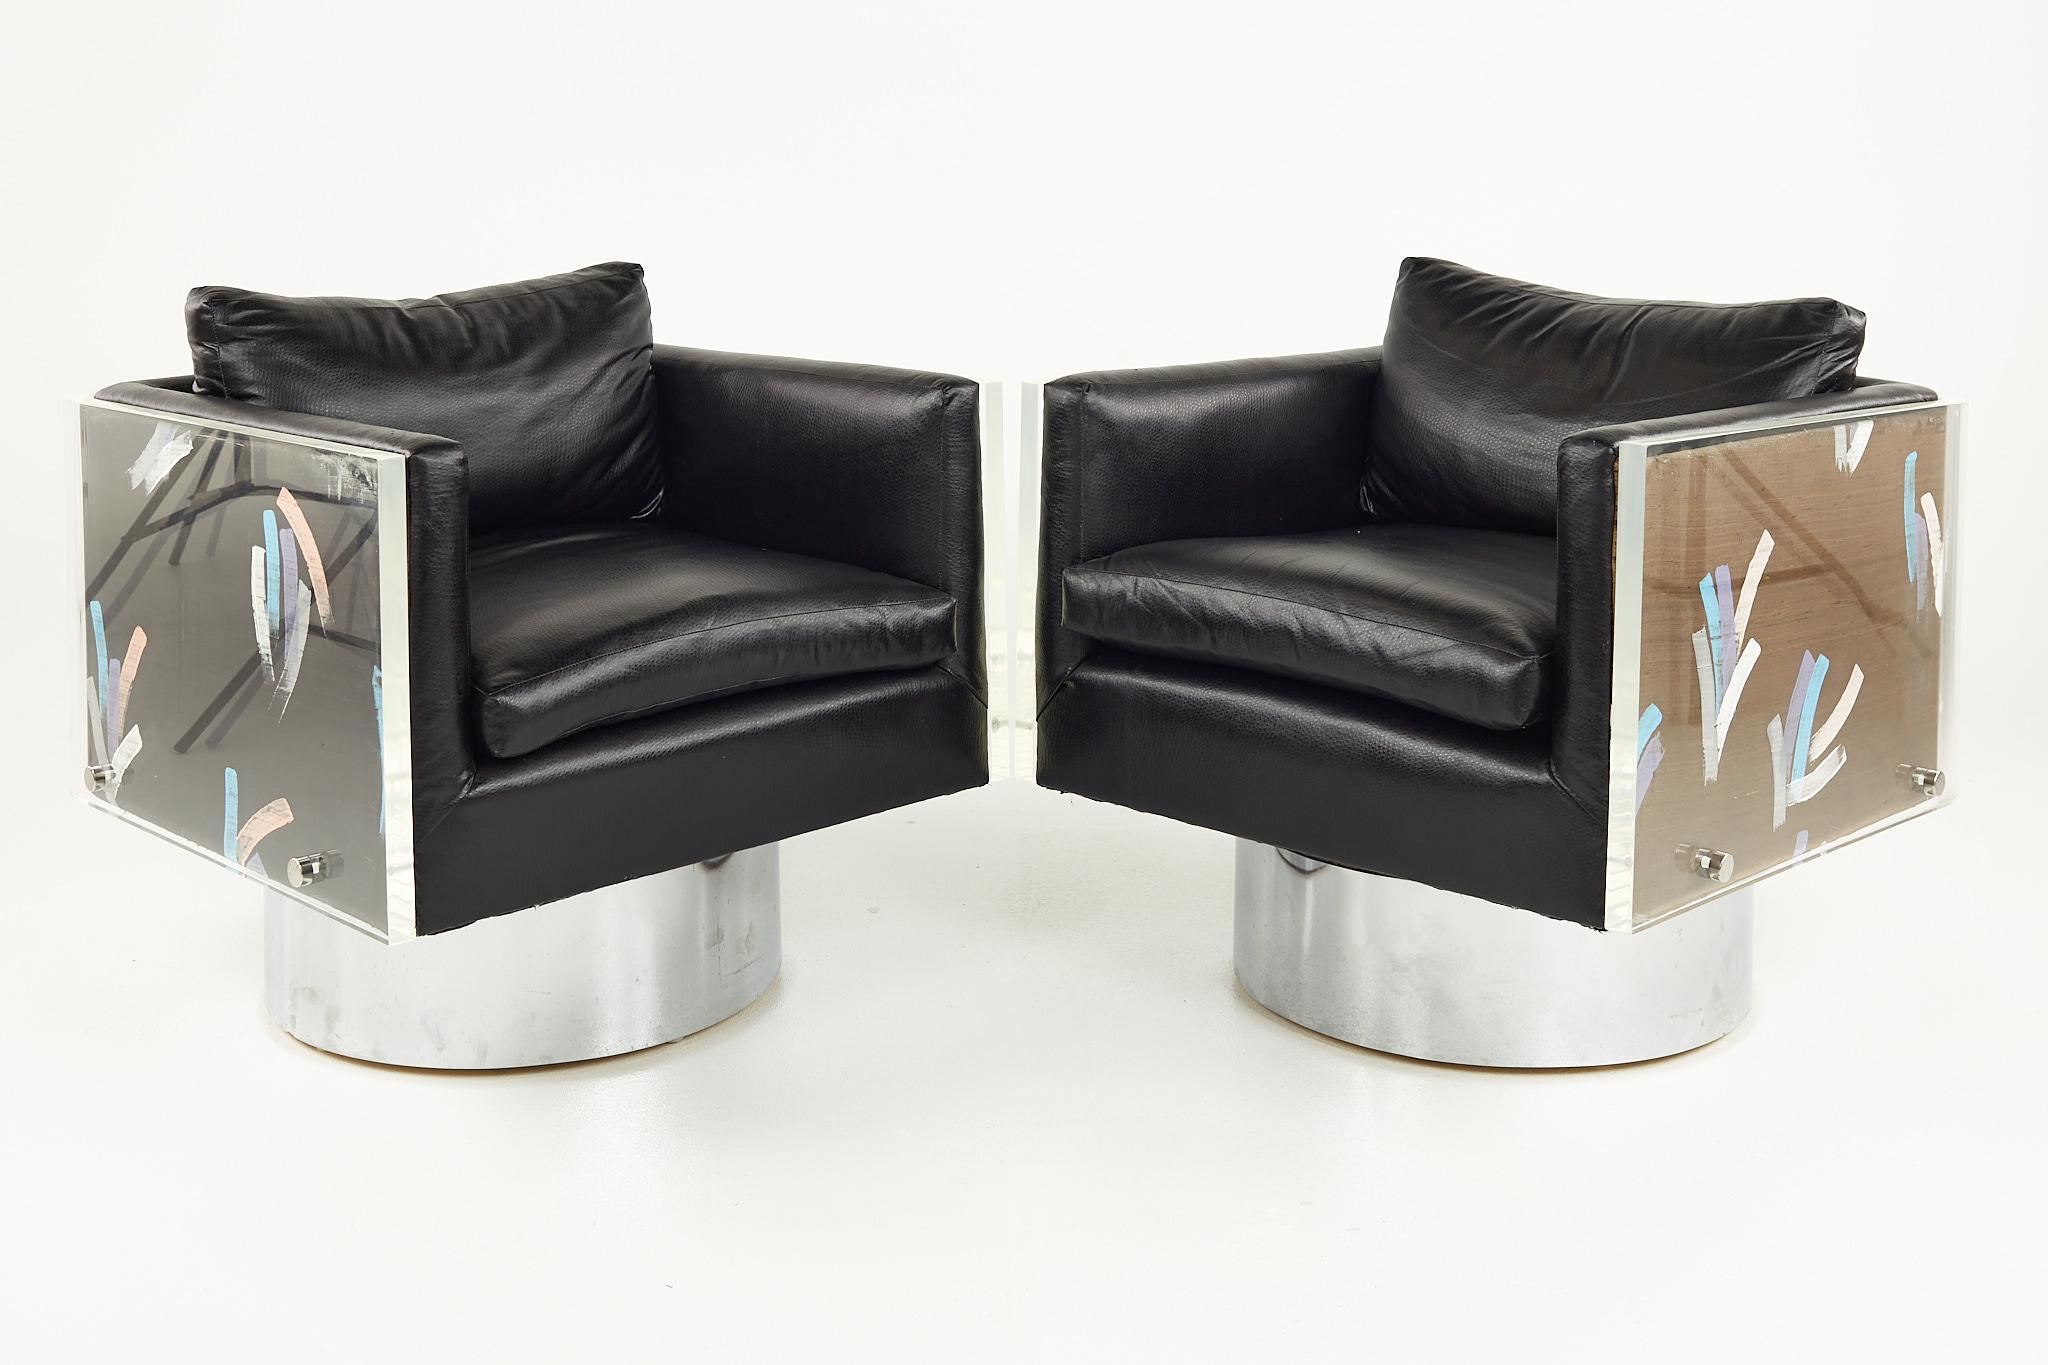 Leon Rosen for Pace Style Post Modern Lucite cube lounge chairs 

Each chair measures: 28 wide x 29.5 deep x 28 inches high, with a seat height of 18 and arm height of 24 inches

All pieces of furniture can be had in what we call restored